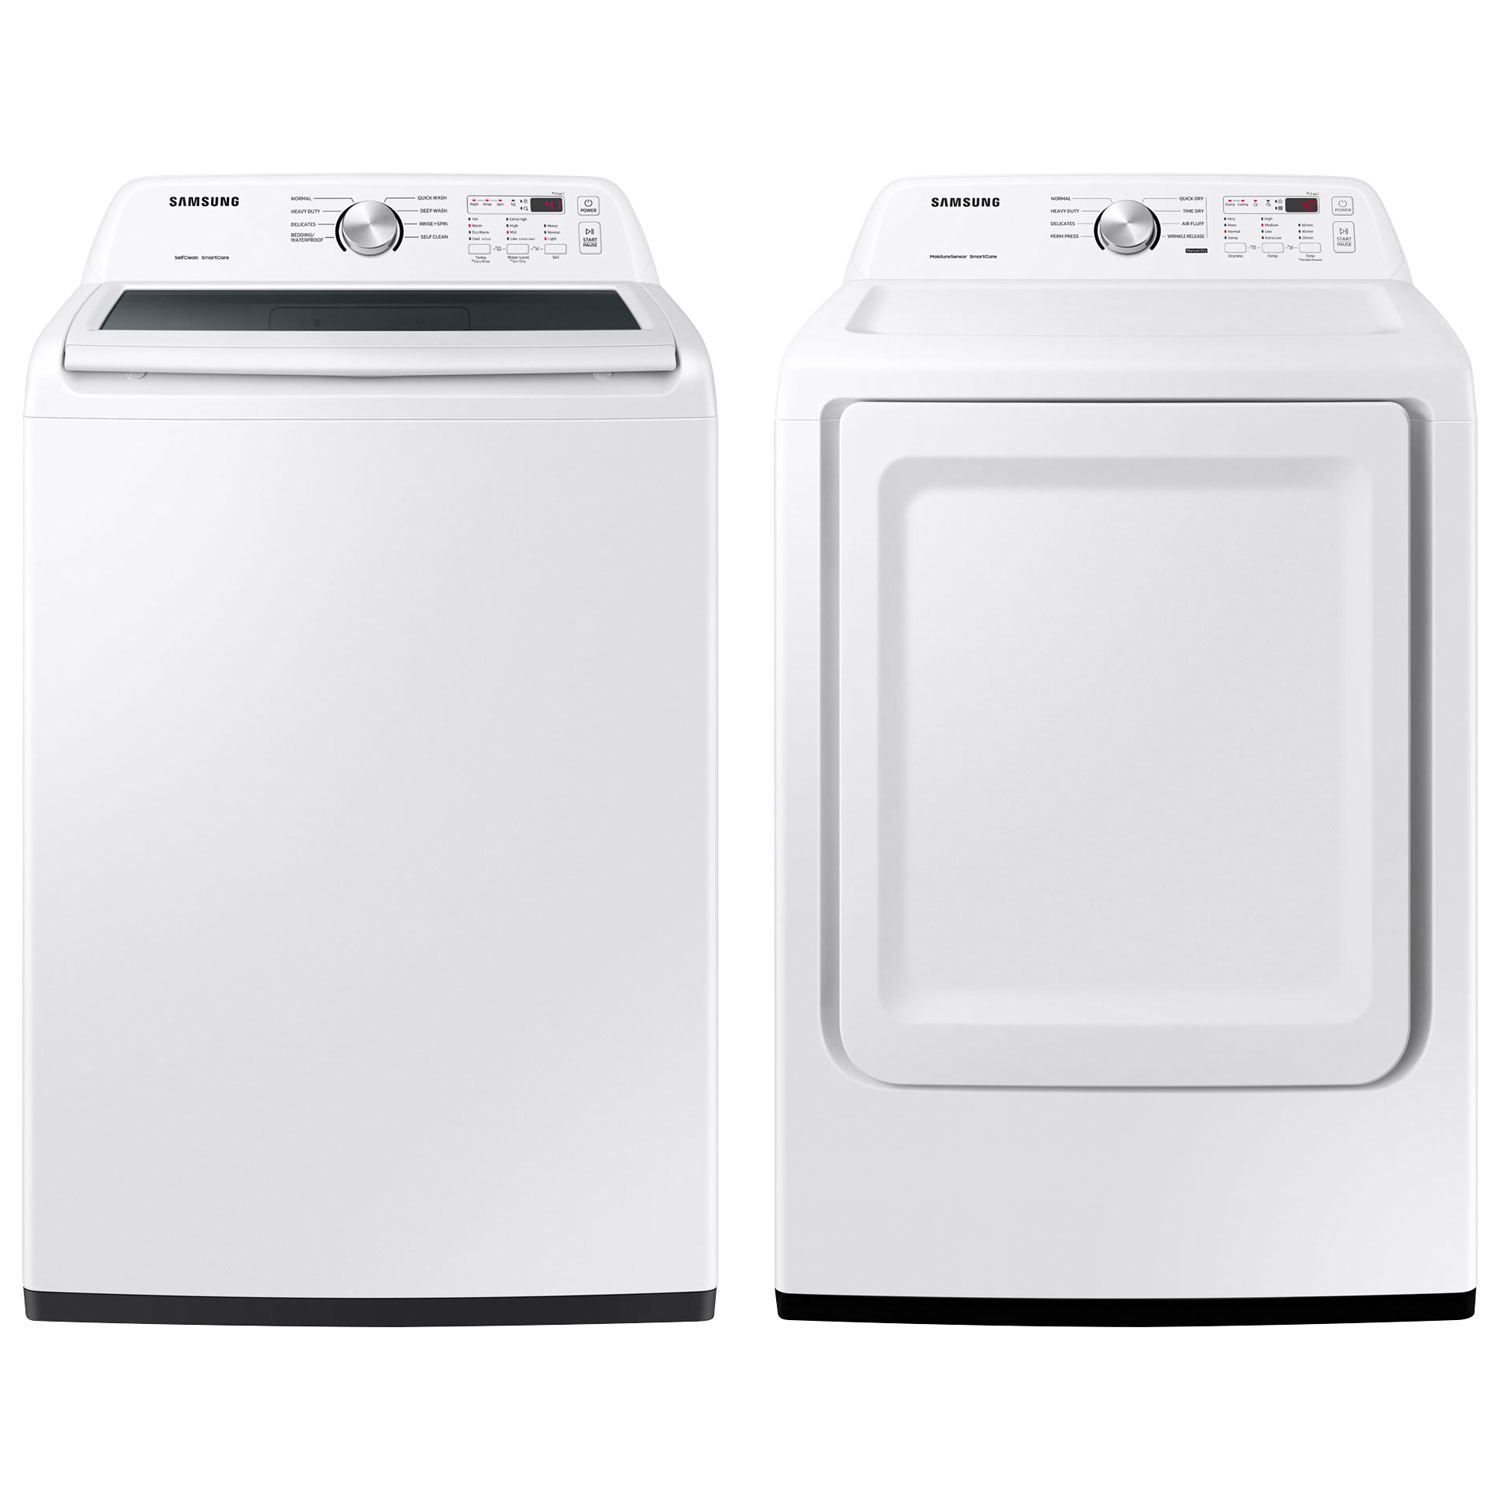 Samsung 5.0 Cu. Ft. Top Load Washer & 7.2 Cu. Ft. Electric Dryer - White